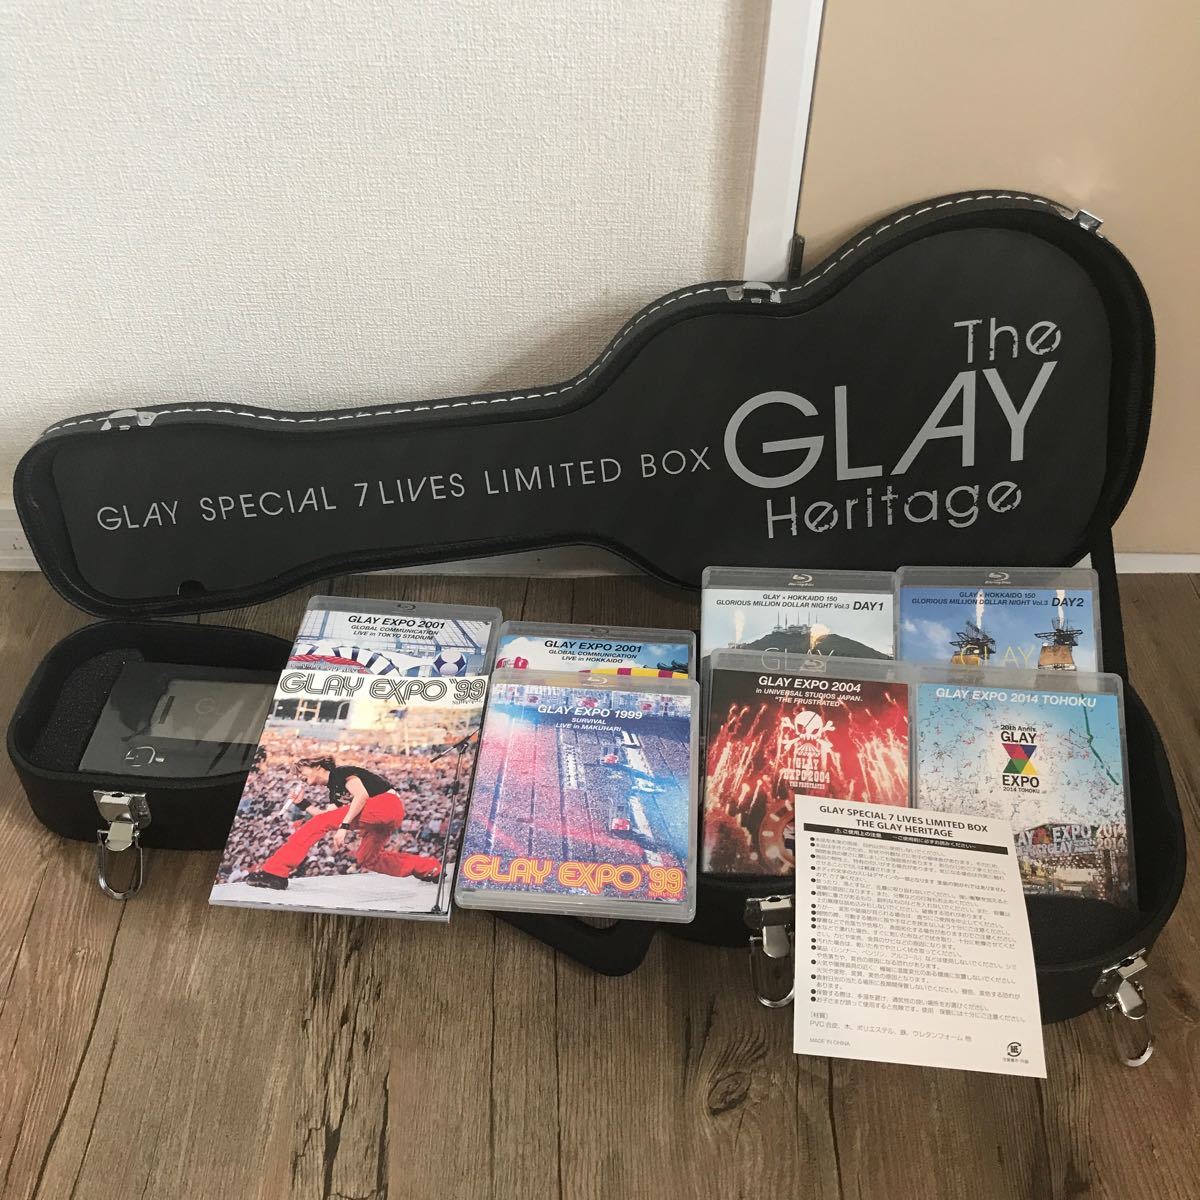 GLAY SPECIAL 7 LIVES LIMITED BOX セブンイレブン限定